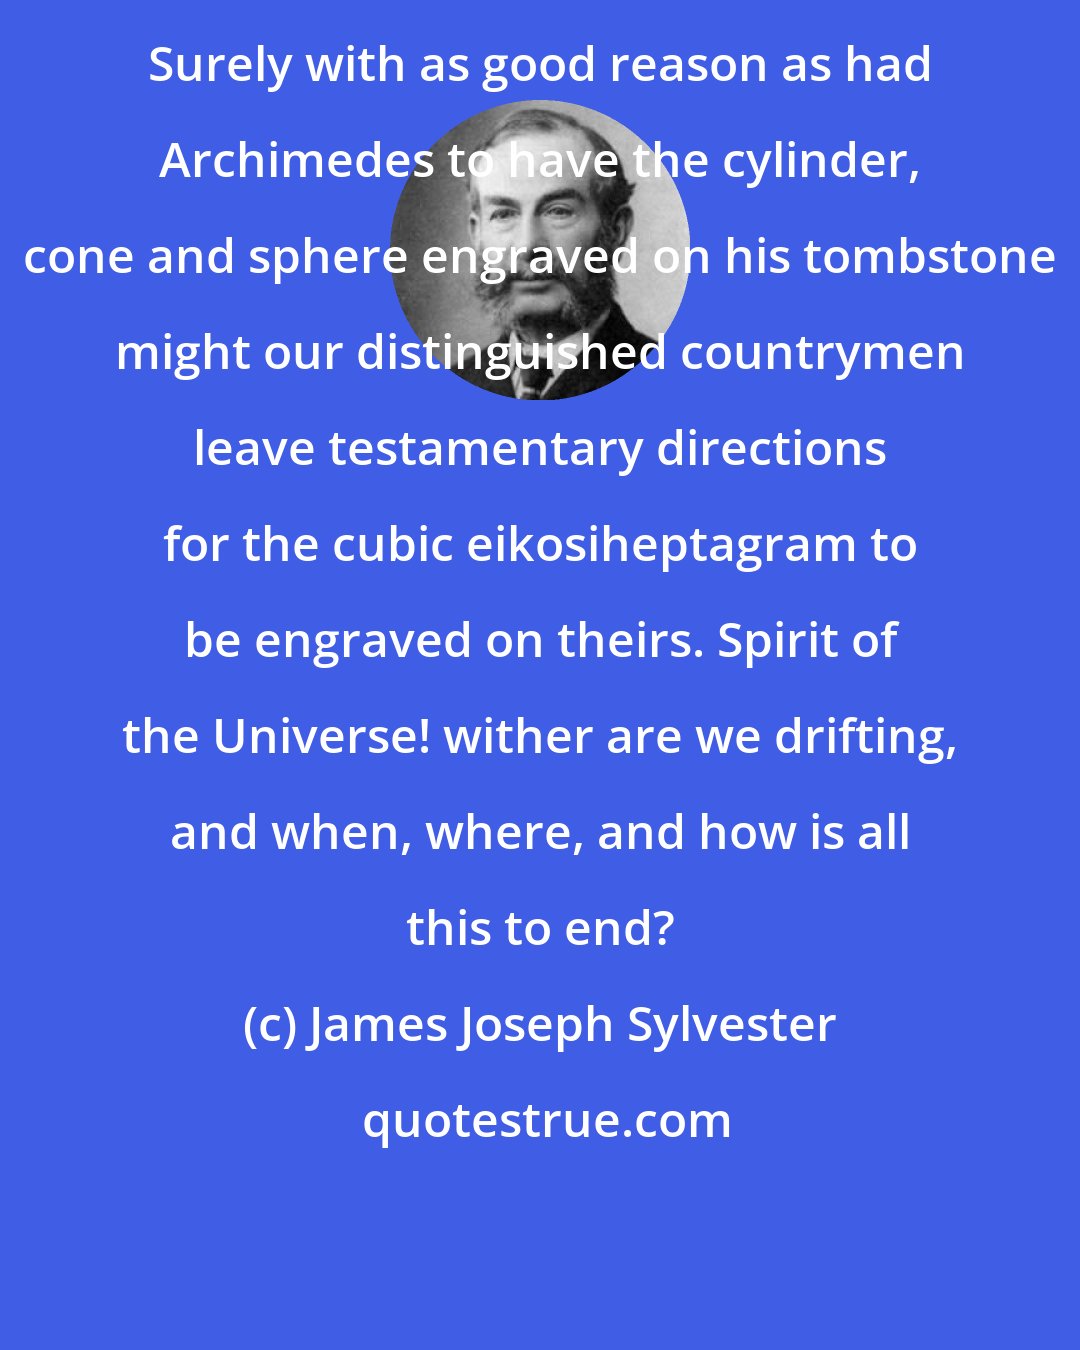 James Joseph Sylvester: Surely with as good reason as had Archimedes to have the cylinder, cone and sphere engraved on his tombstone might our distinguished countrymen leave testamentary directions for the cubic eikosiheptagram to be engraved on theirs. Spirit of the Universe! wither are we drifting, and when, where, and how is all this to end?